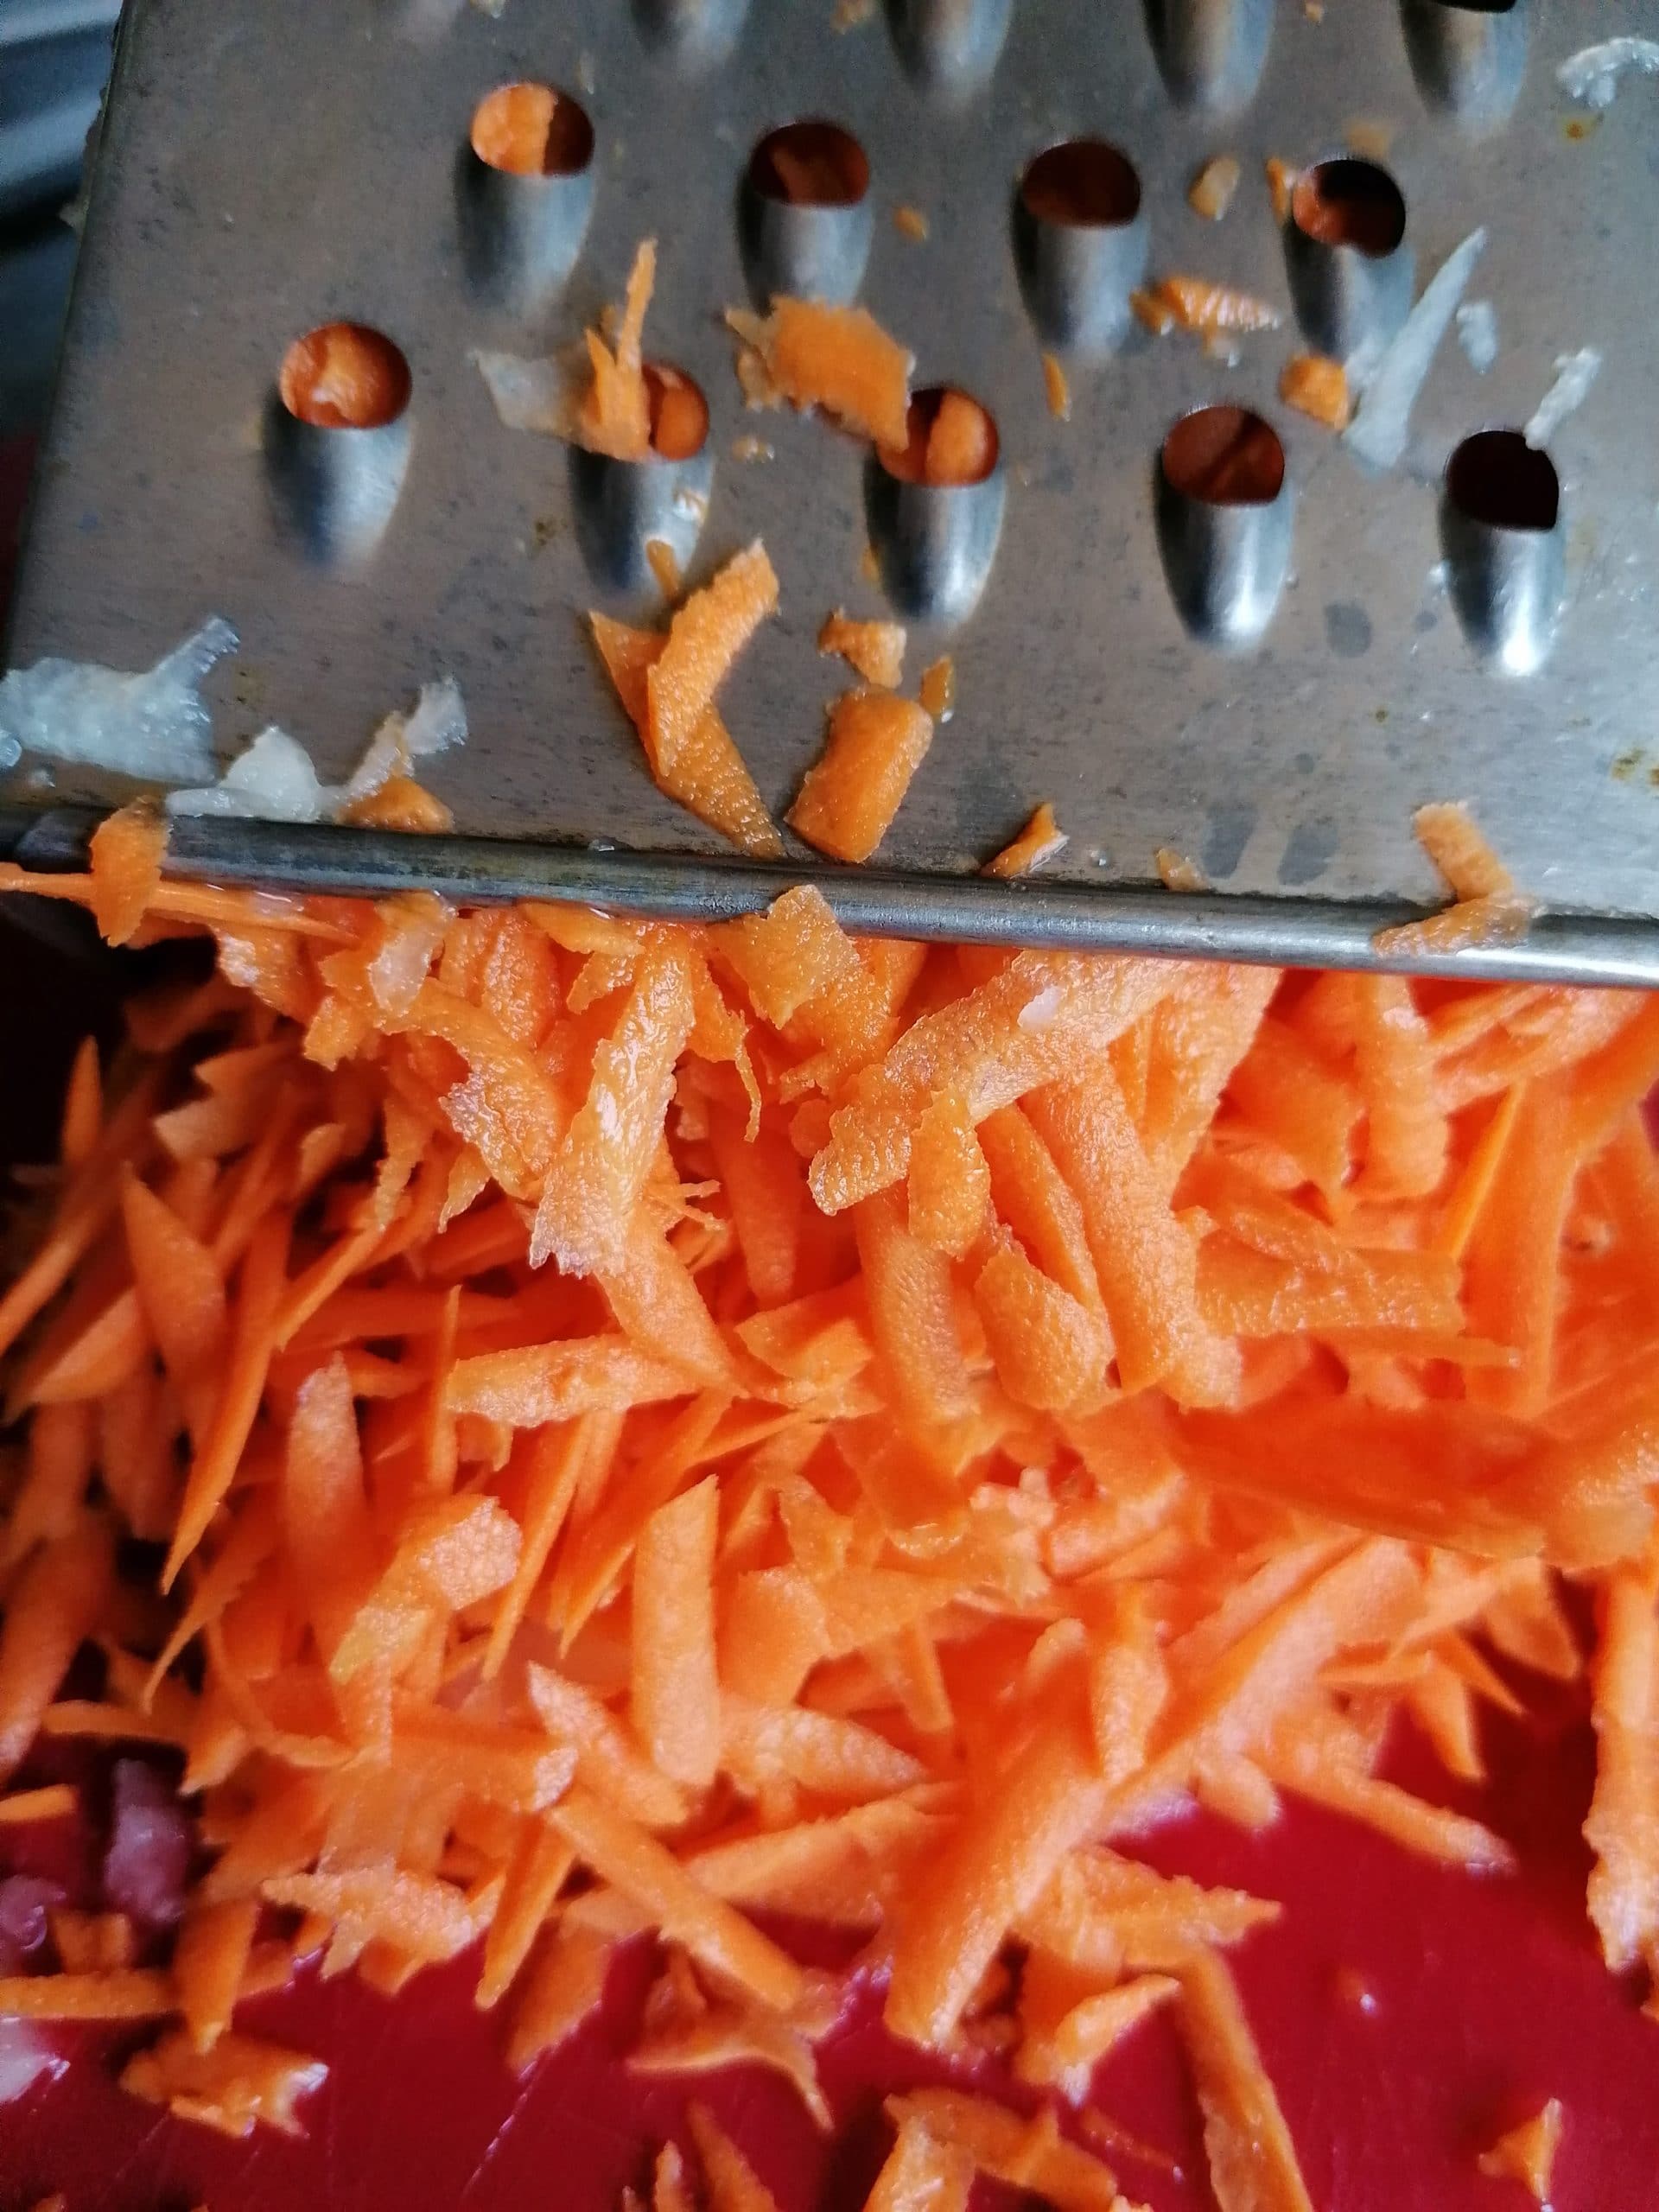 A close-up photo capturing the culinary process of grating peeled carrots on a box grater. The vibrant orange carrots are being transformed into fine, grated strands, perfect for adding delightful sweetness and color to a delicious dish.